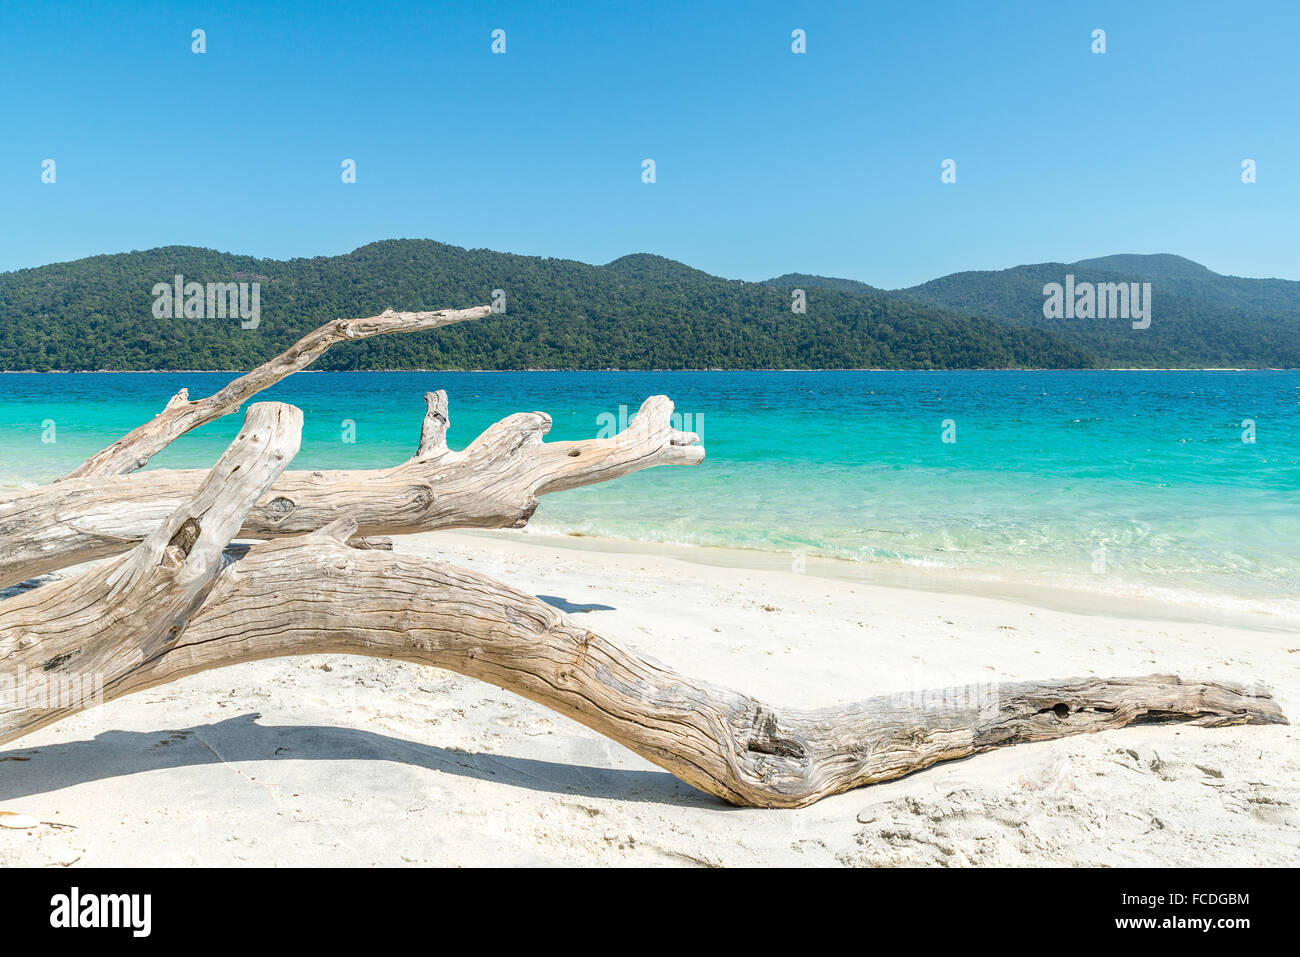 Summer, Travel, Vacation and Holiday concept - White wood on the beach near tropical sea in Phuket, Thailand Stock Photo